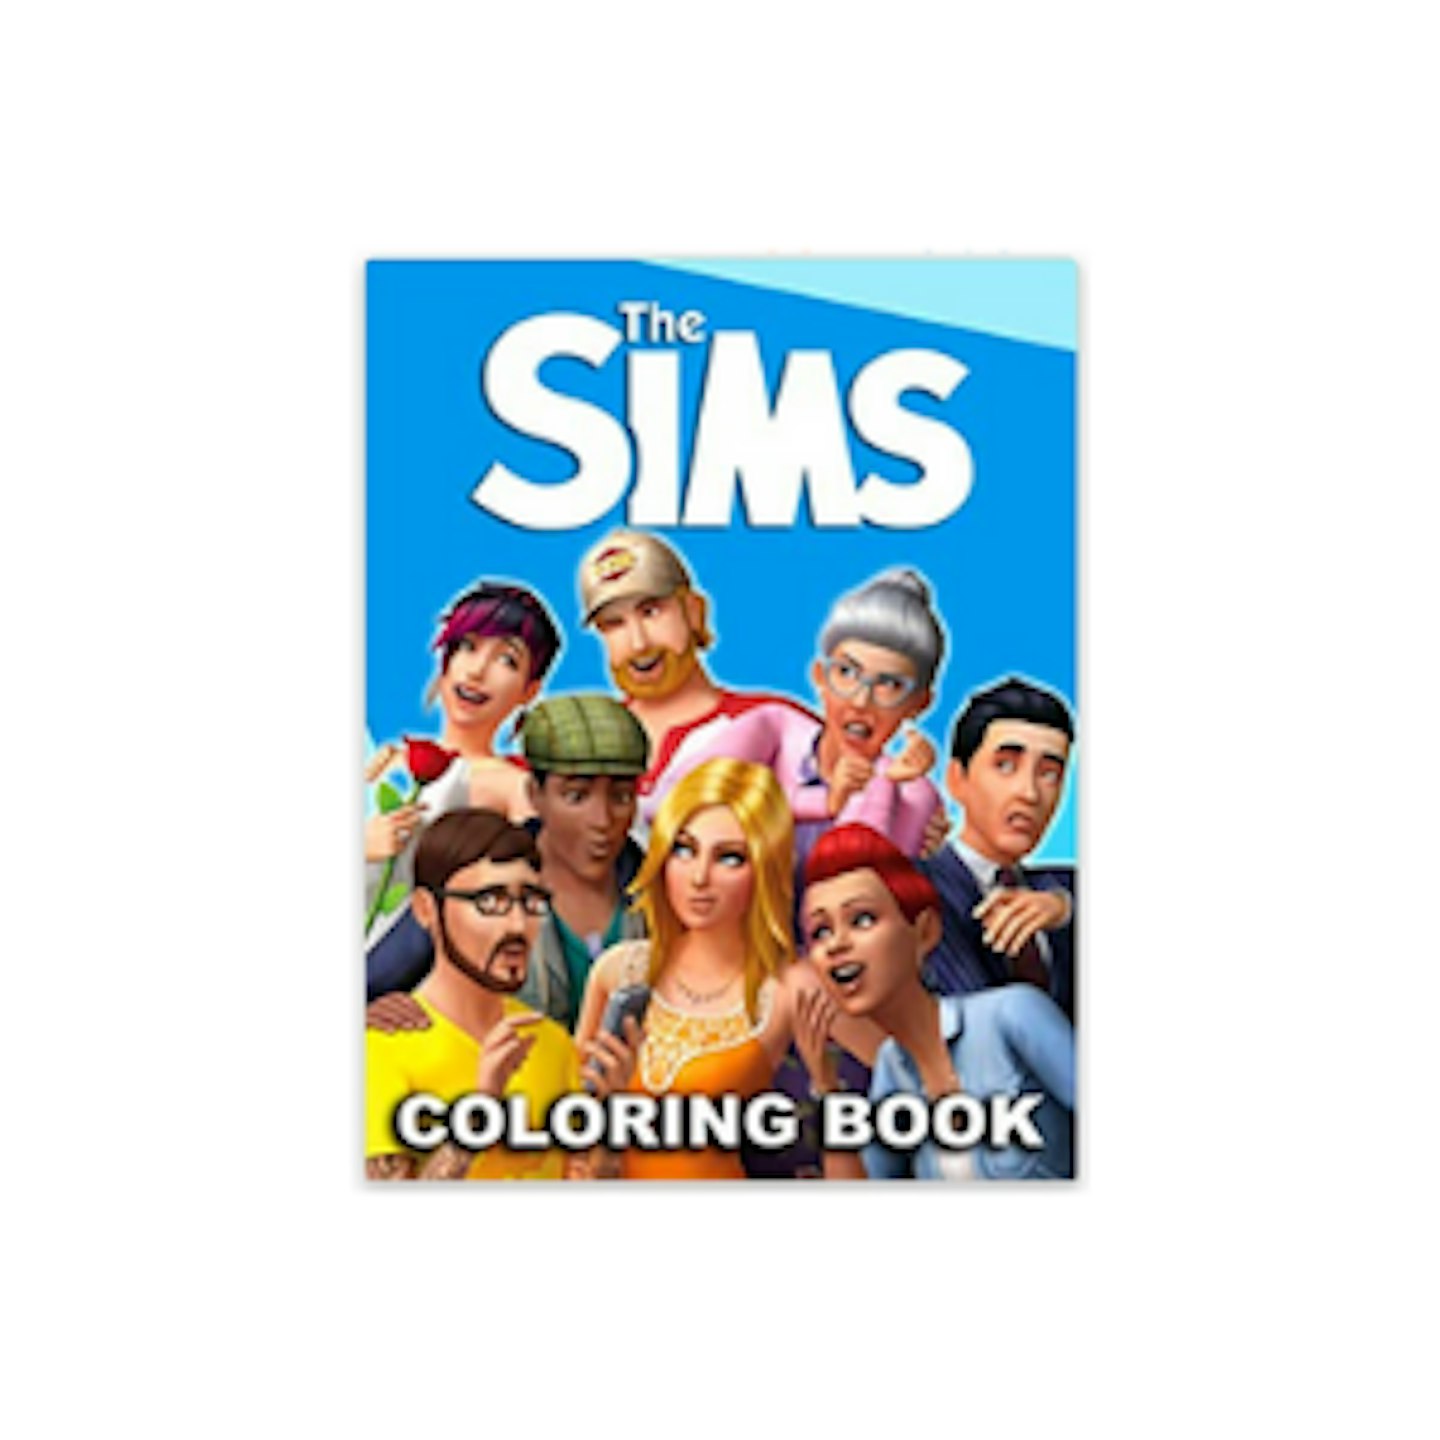 The Sims Colouring Book